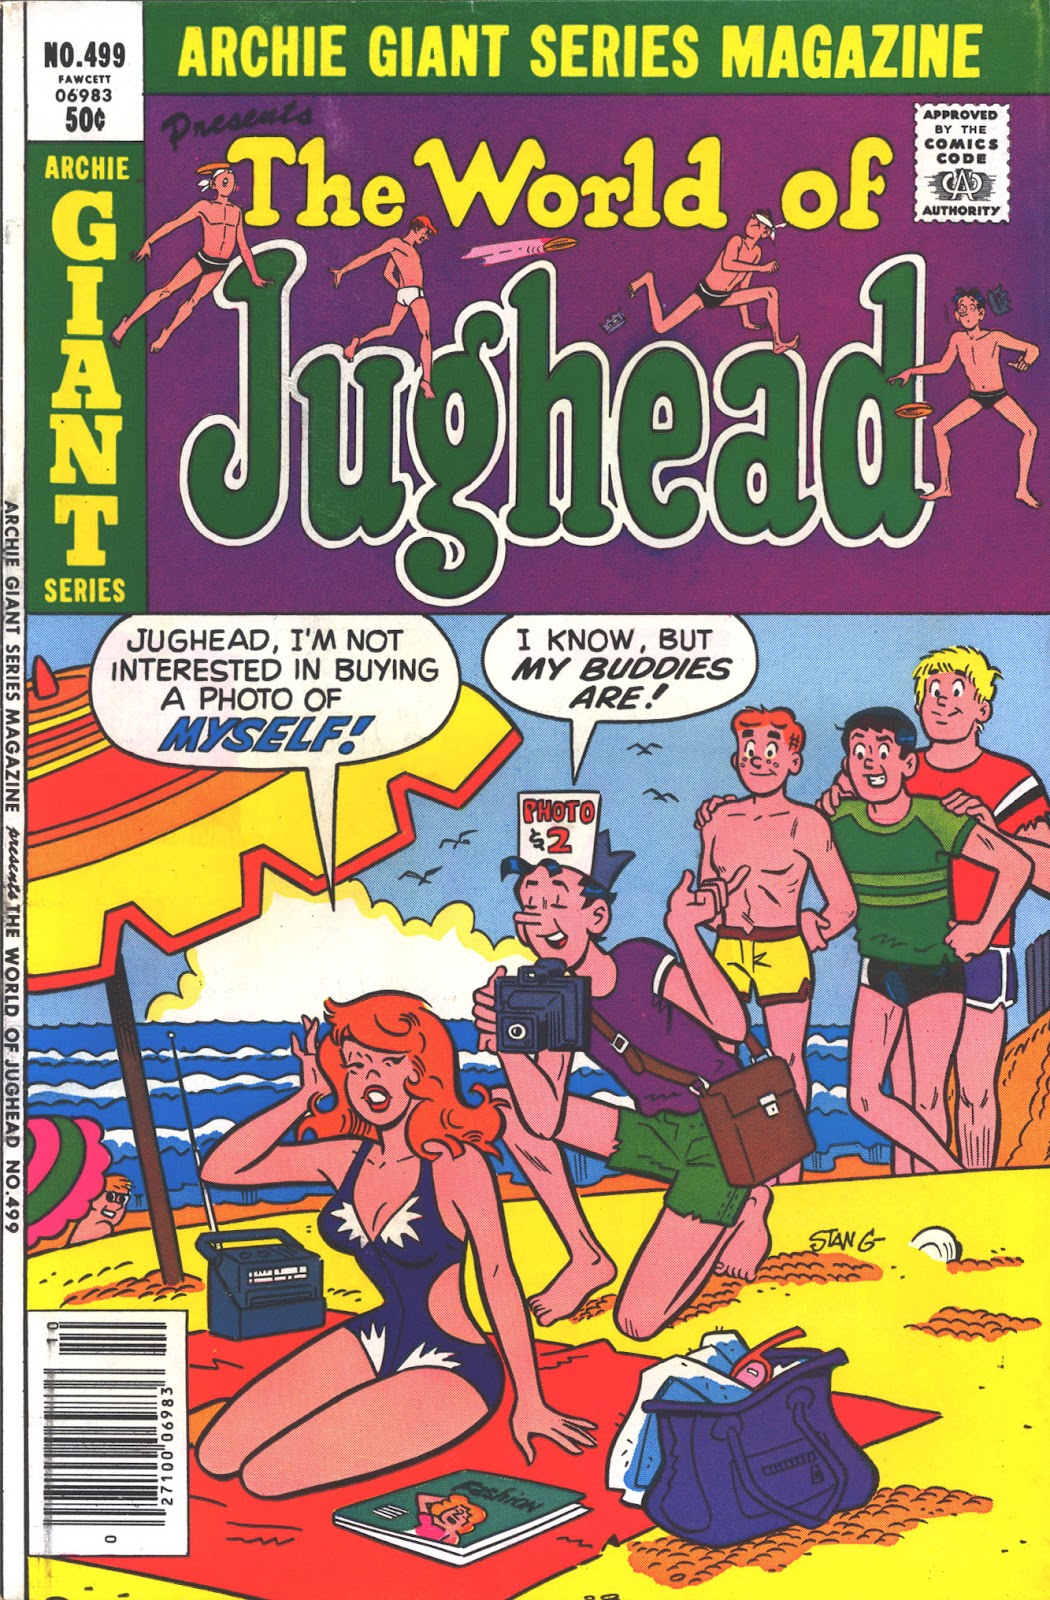 Archie Giant Series Magazine 499 Page 1